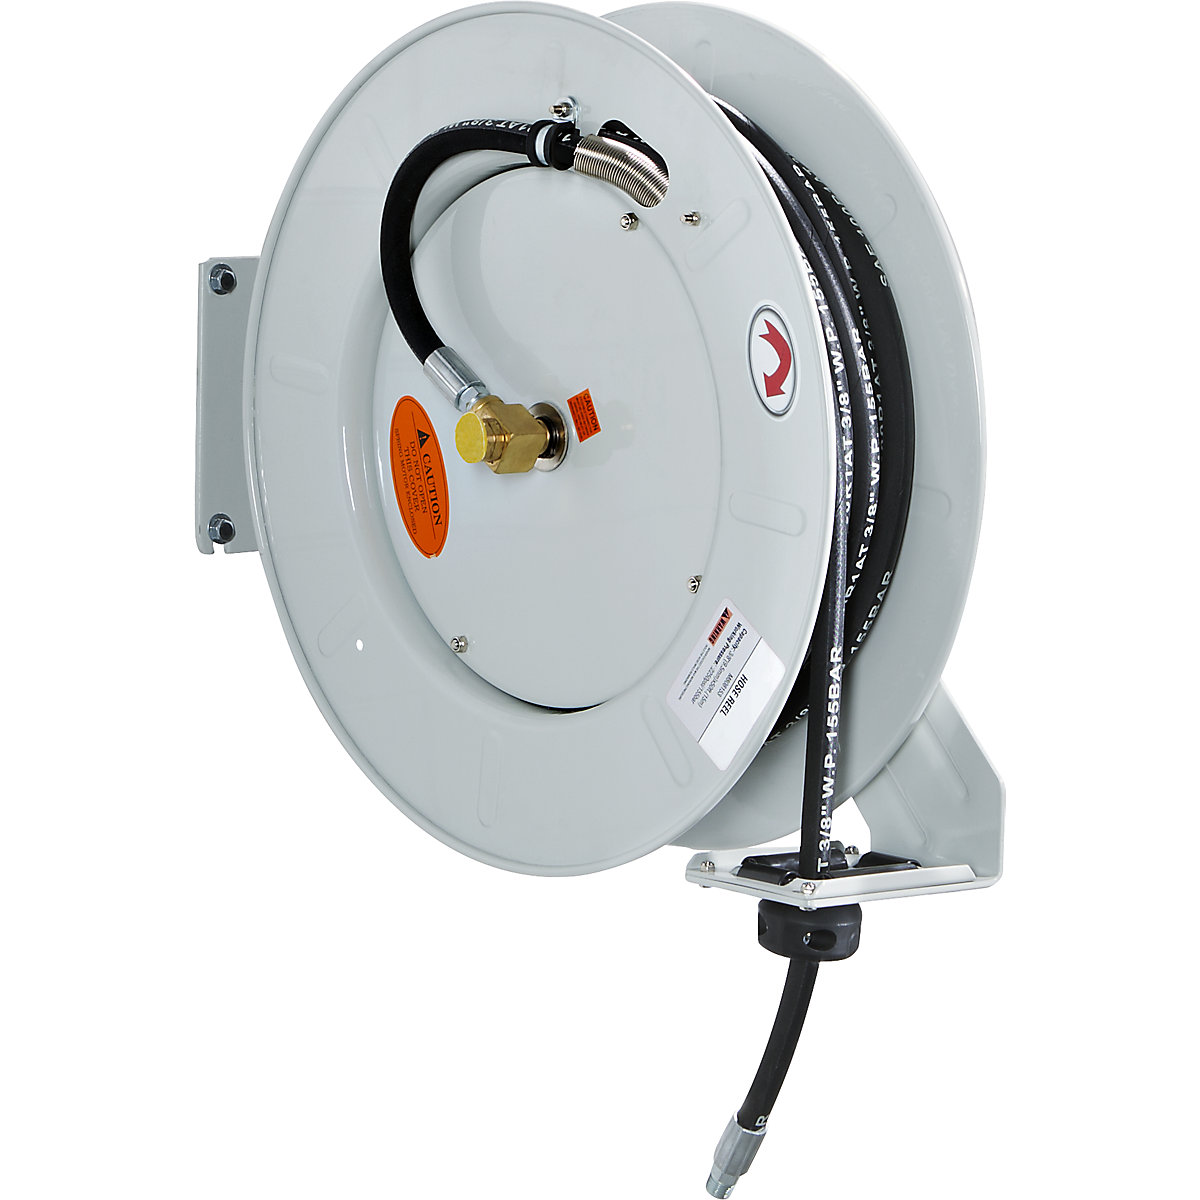 Hose reel – eurokraft pro: for water and oil